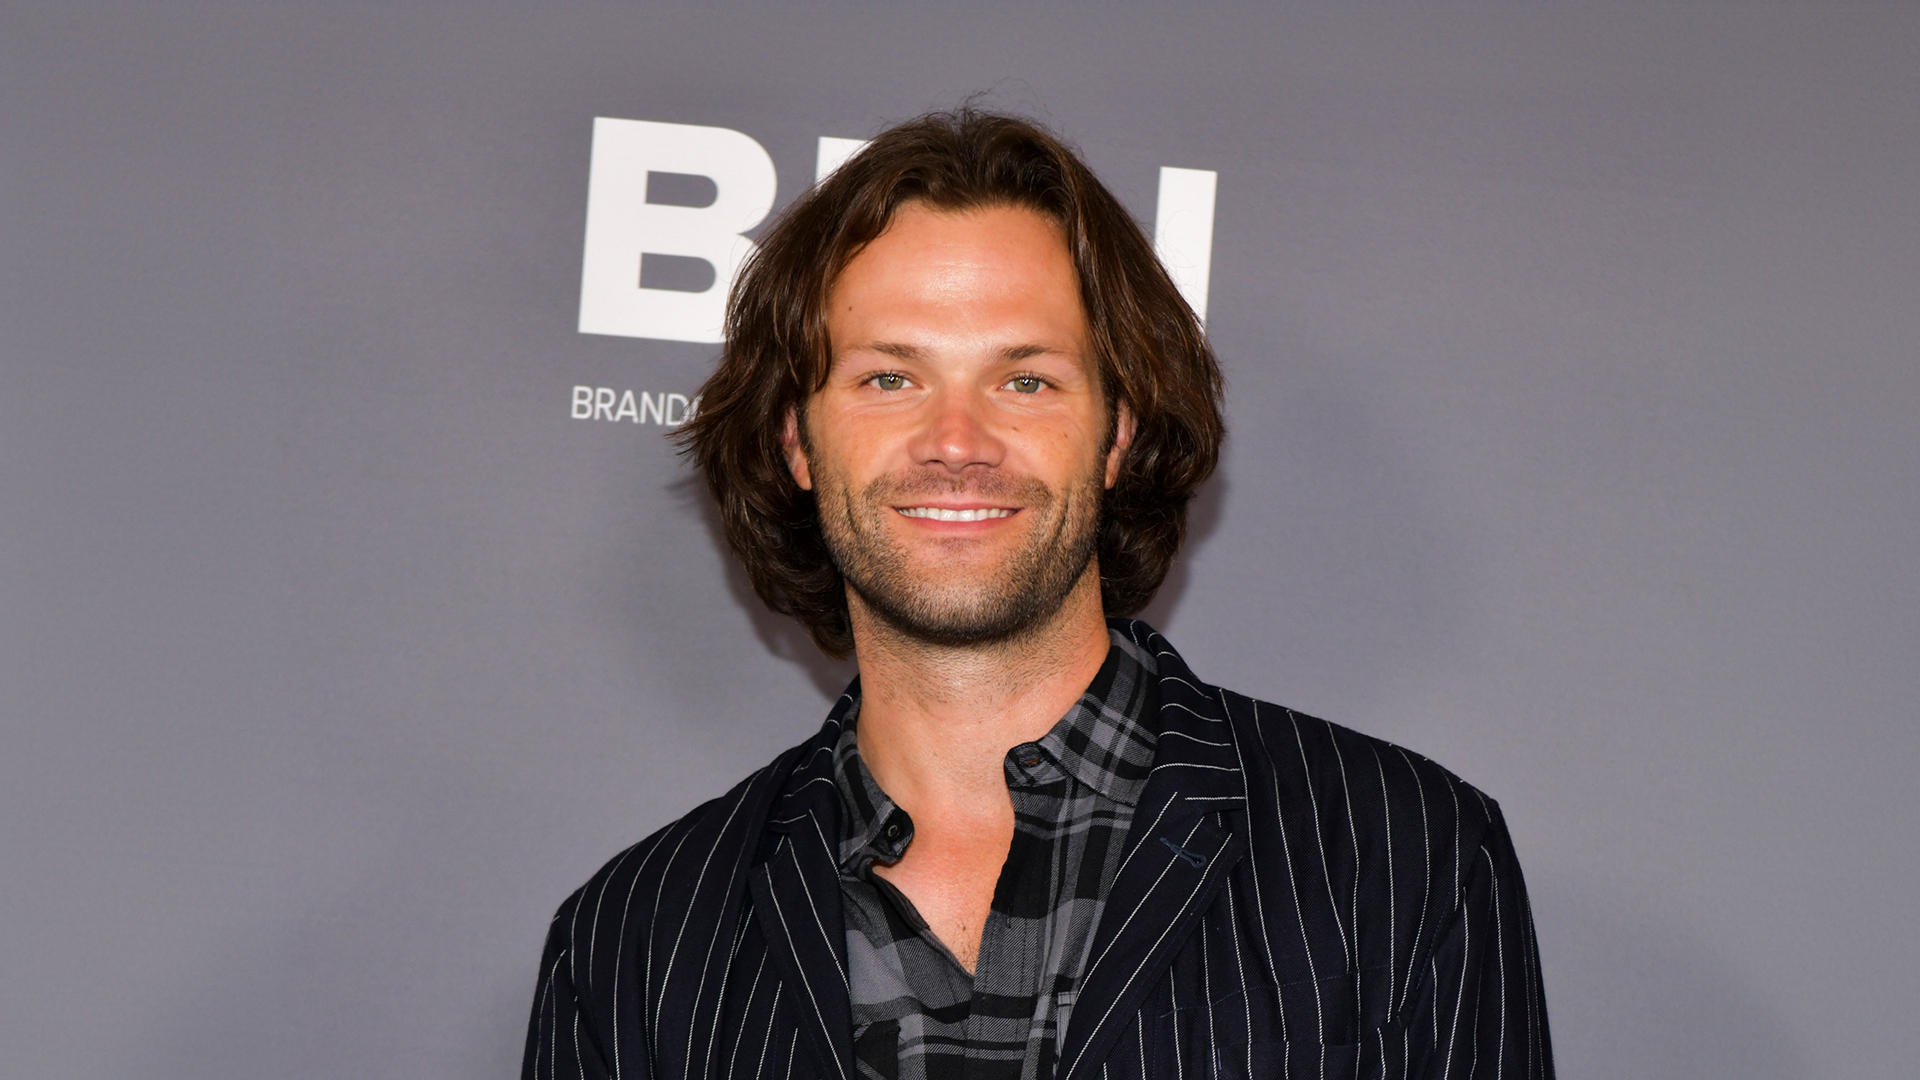 Jared Padalecki tears up as he admits he had ‘suicidal ideation’ during ‘low moment’ and checked into clinic for weeks [Video]